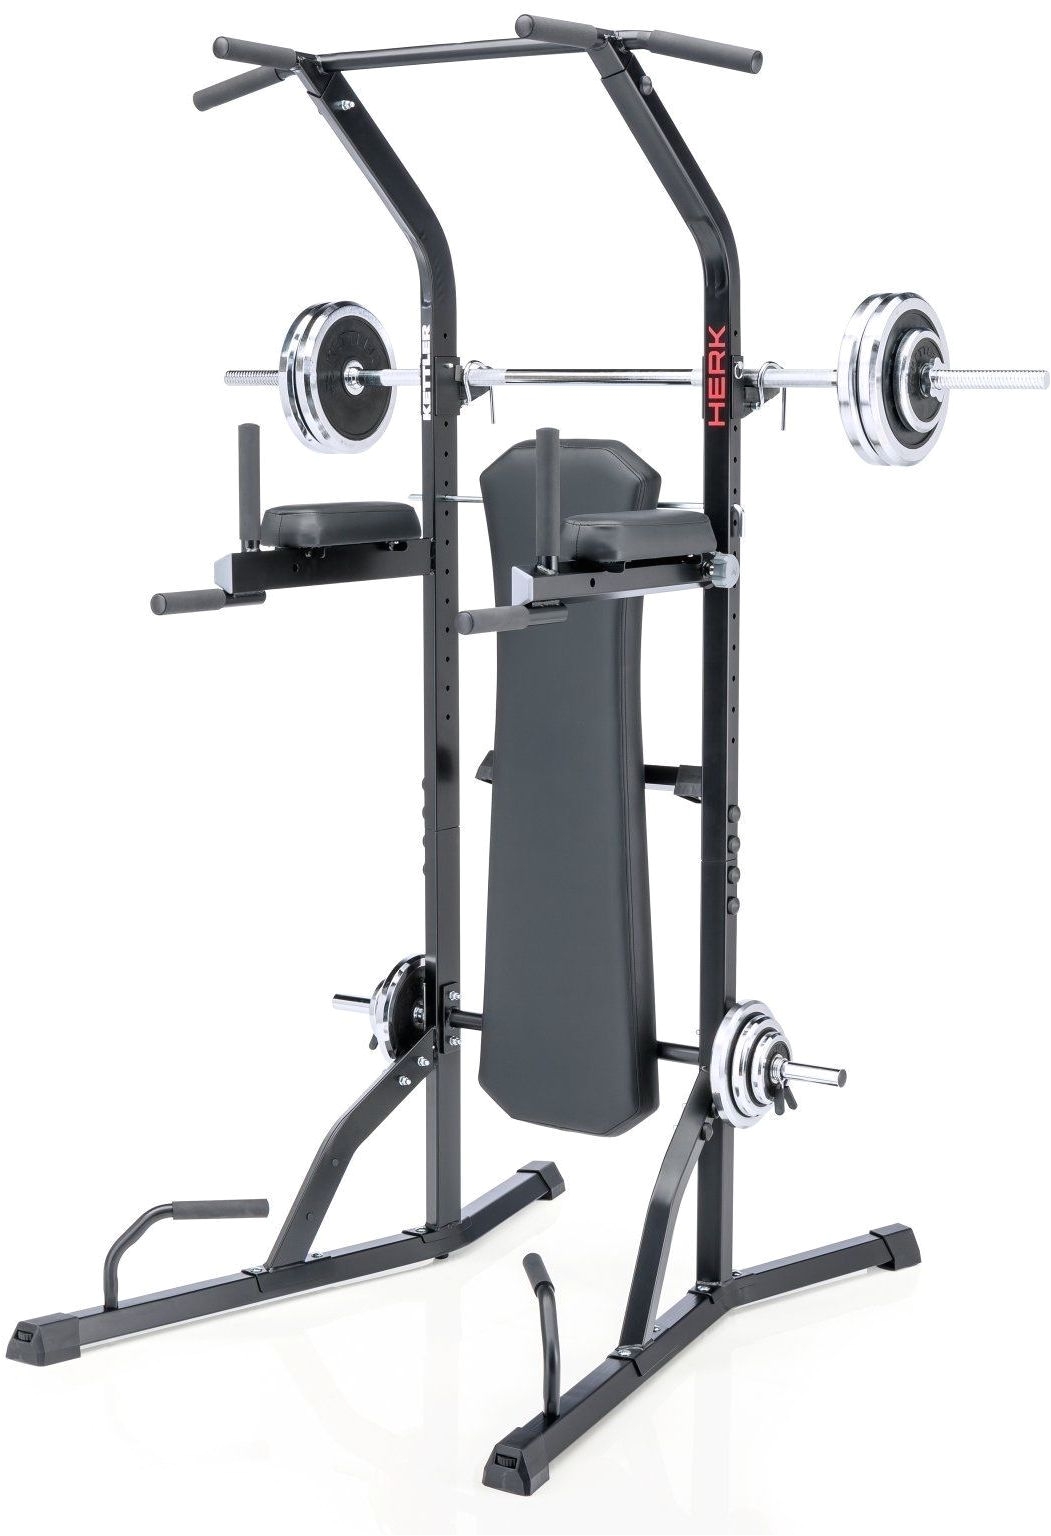 power tower exercise equipment workout home gym squat rack bench press pull up ebay